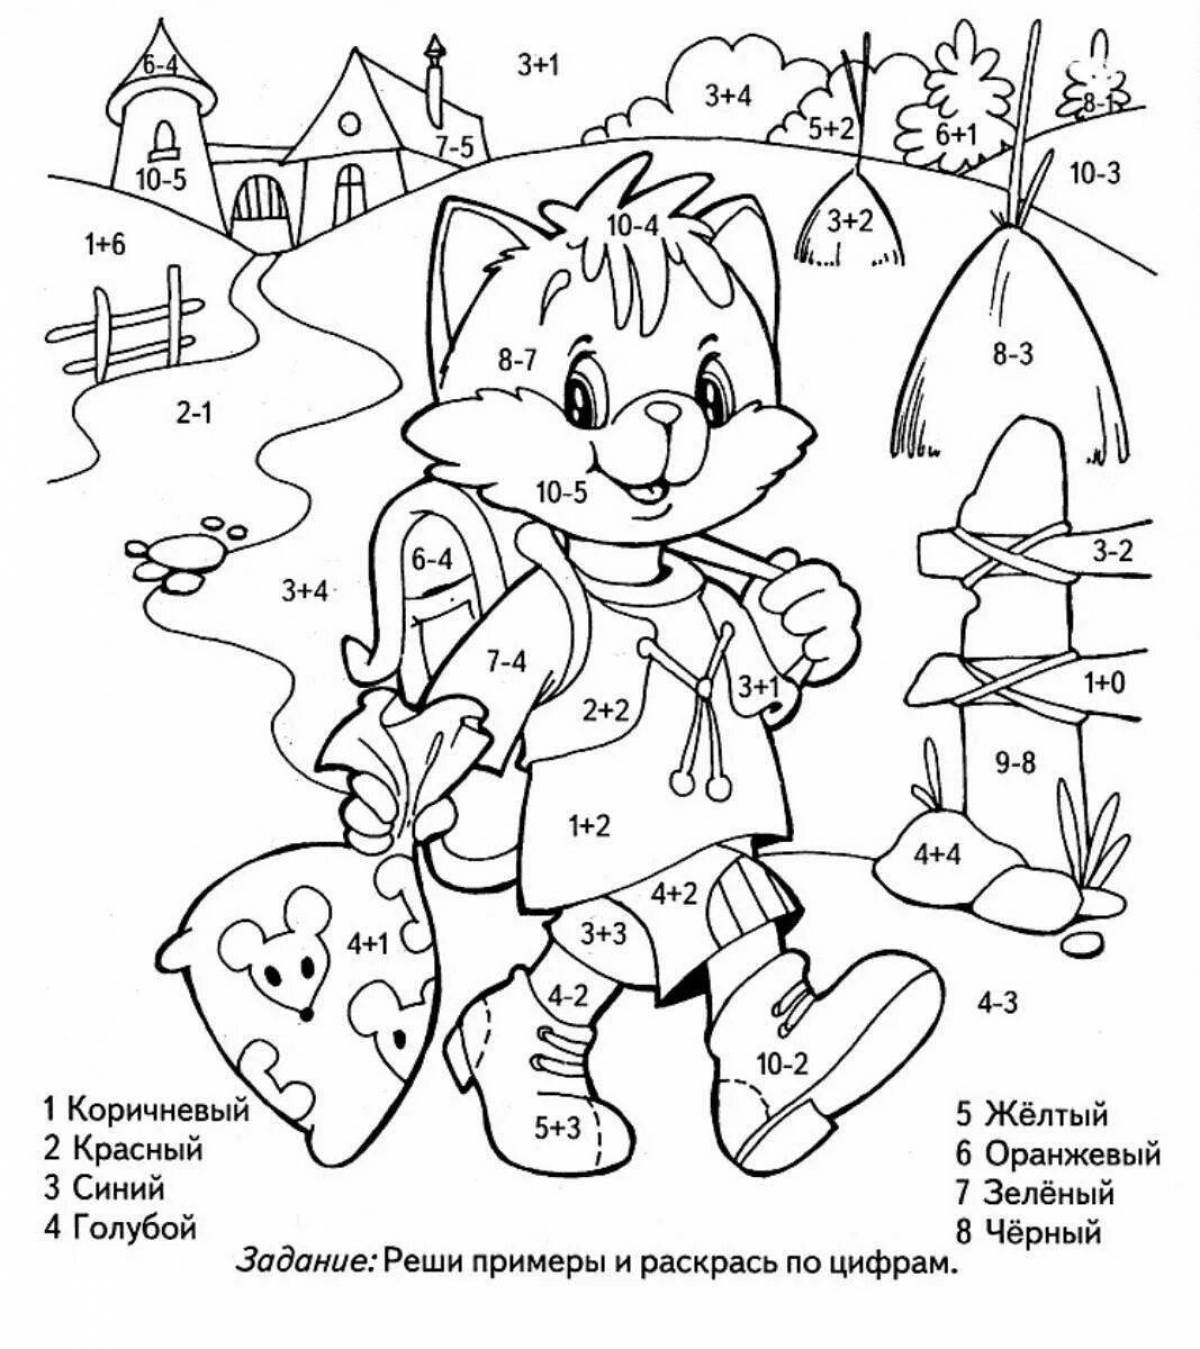 A fun coloring book for first graders with challenging tasks